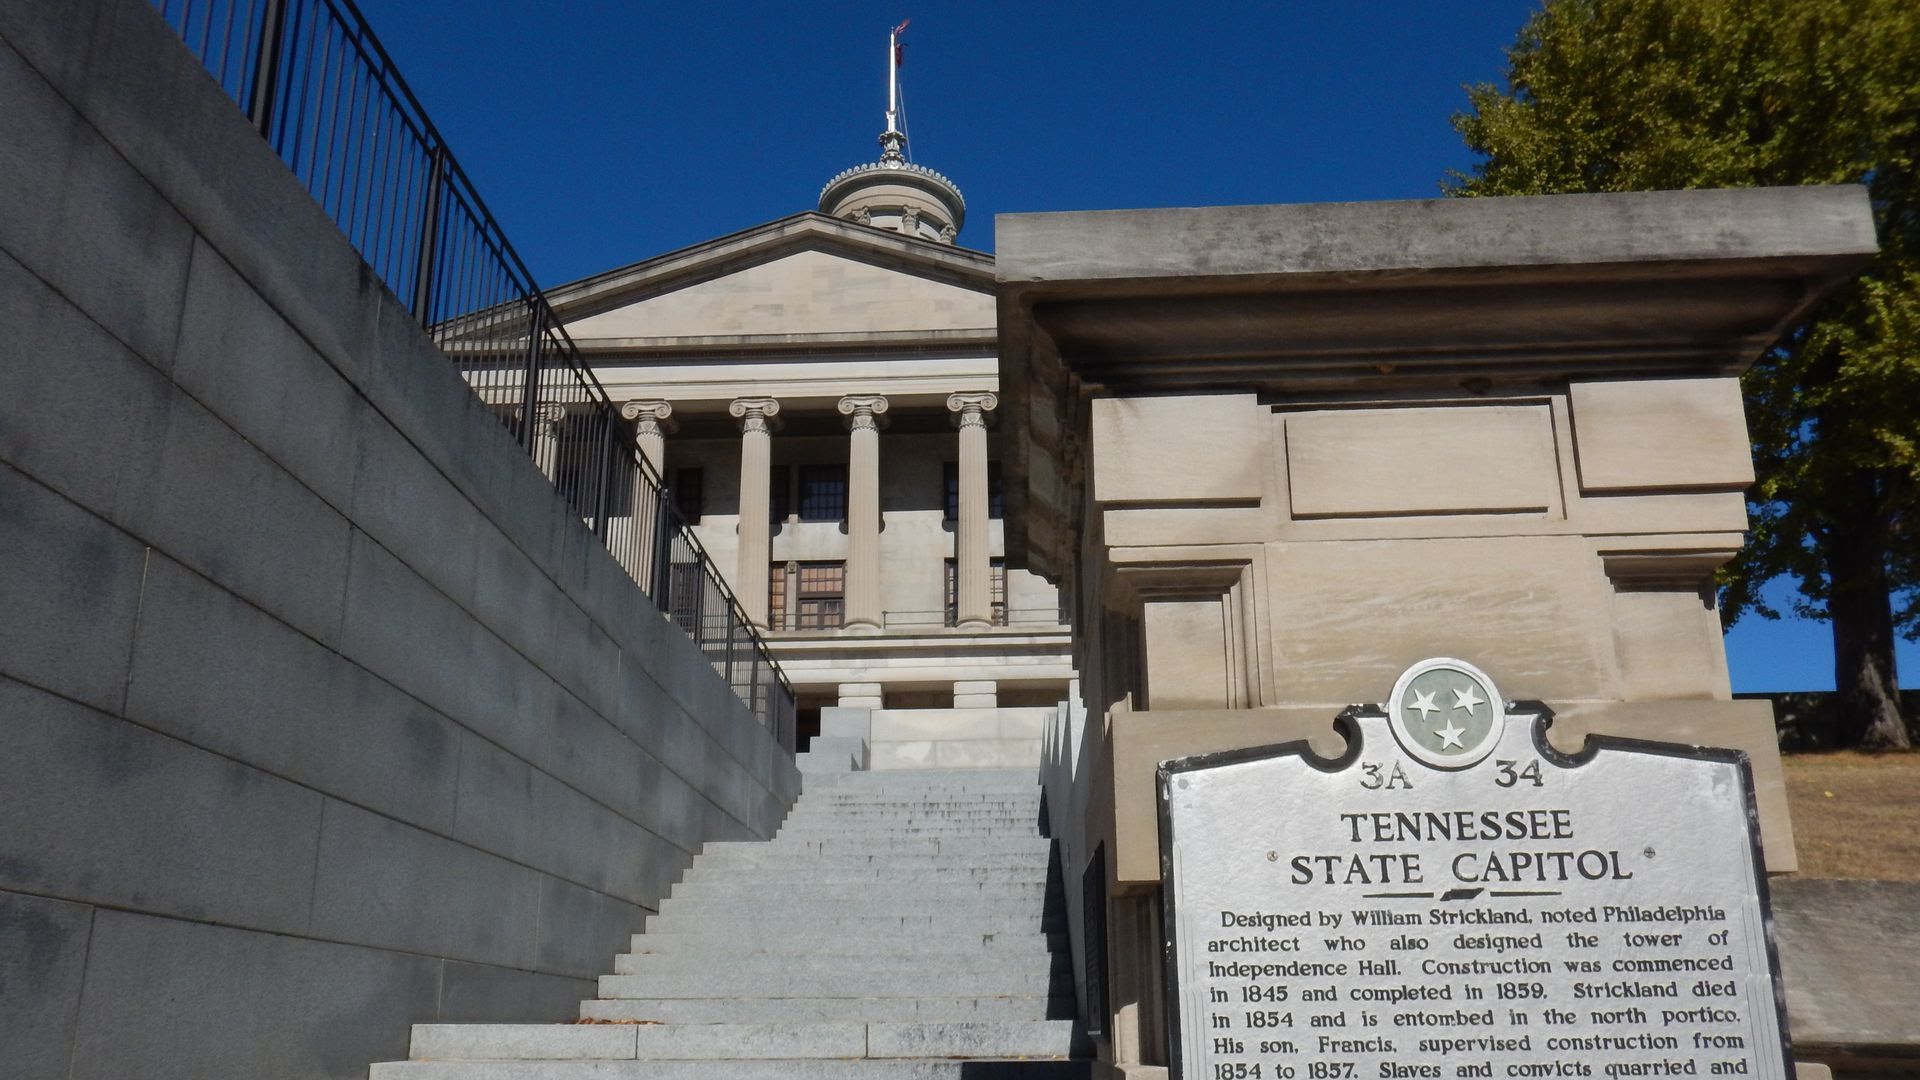 Outside the Tennessee state capitol.